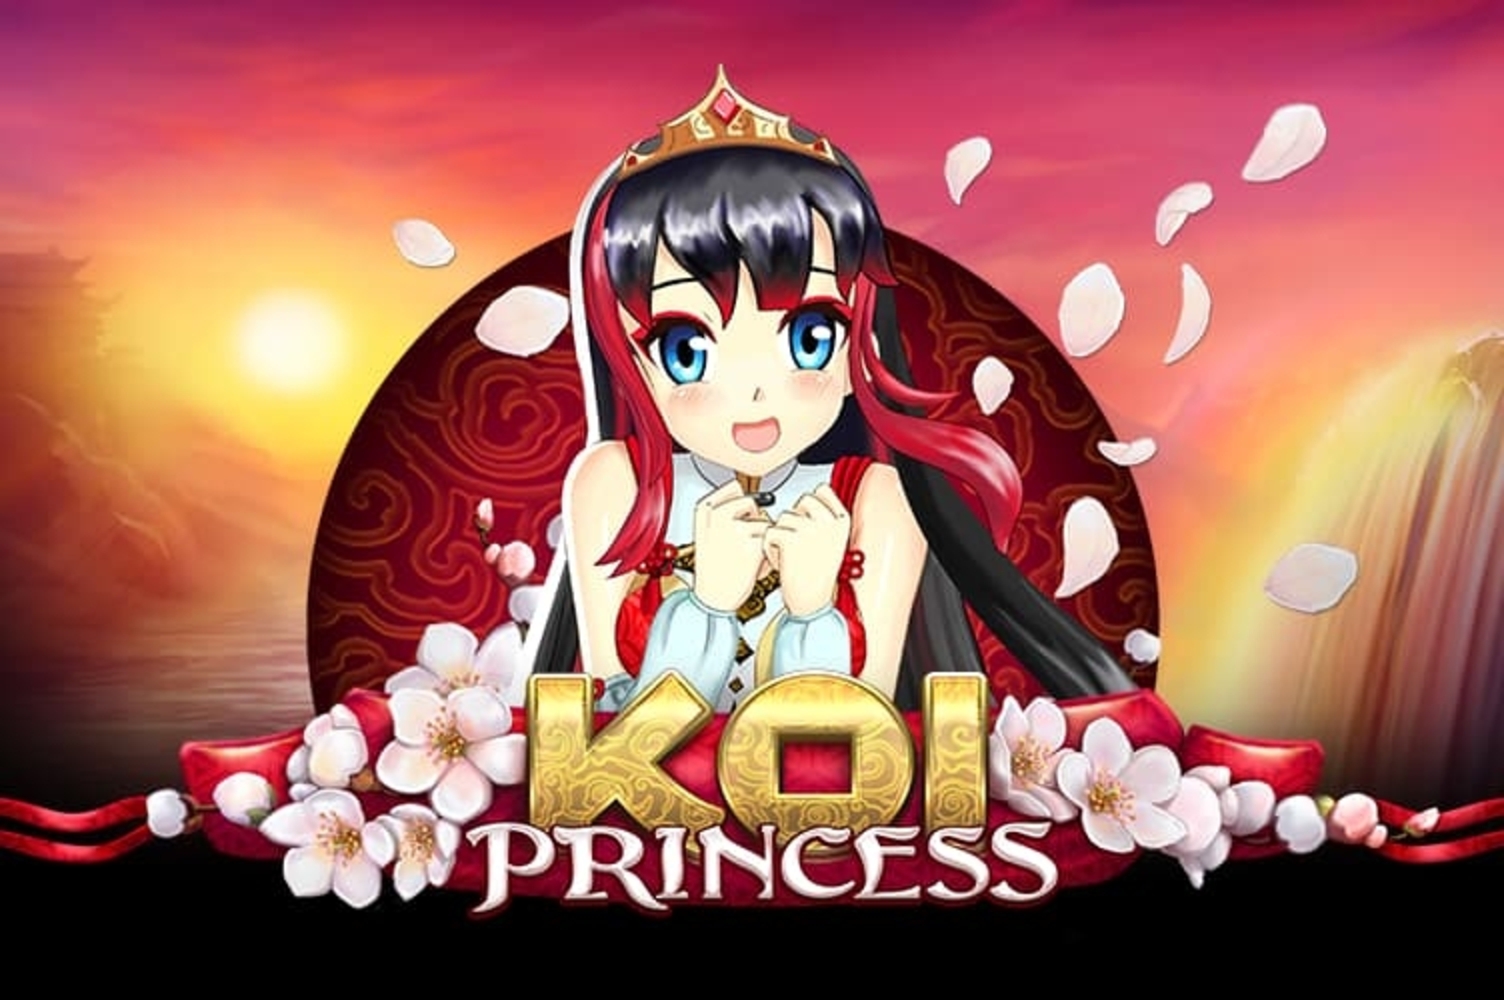 The Koi Princess Online Slot Demo Game by NetEnt